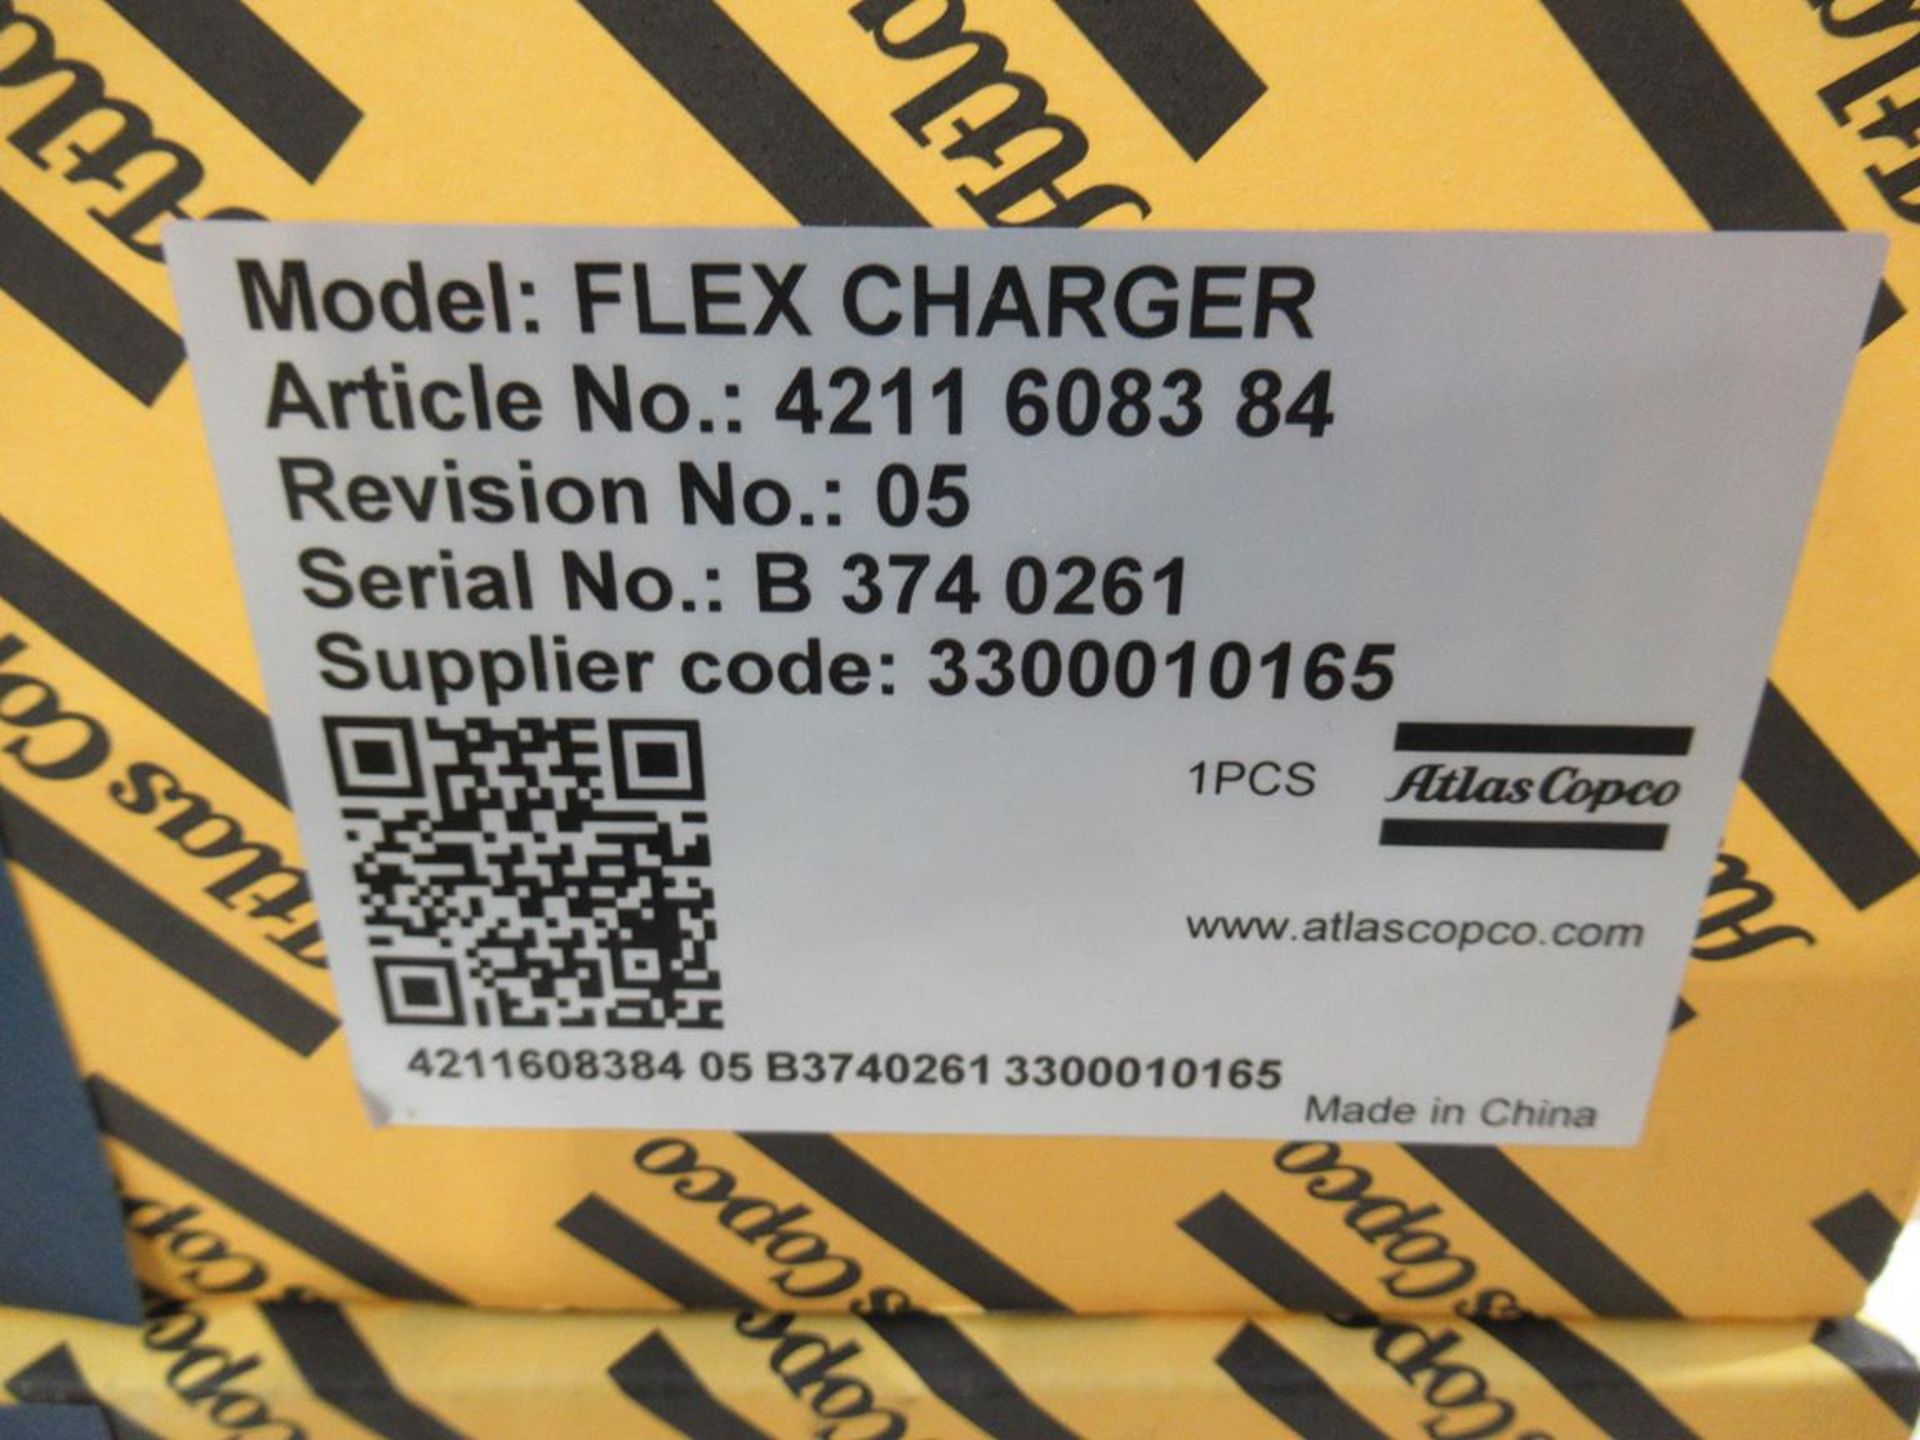 4x (no.) Atlas Copco, flex charger, Article No. 4211 6083 84 (boxed and unused) - Image 3 of 3